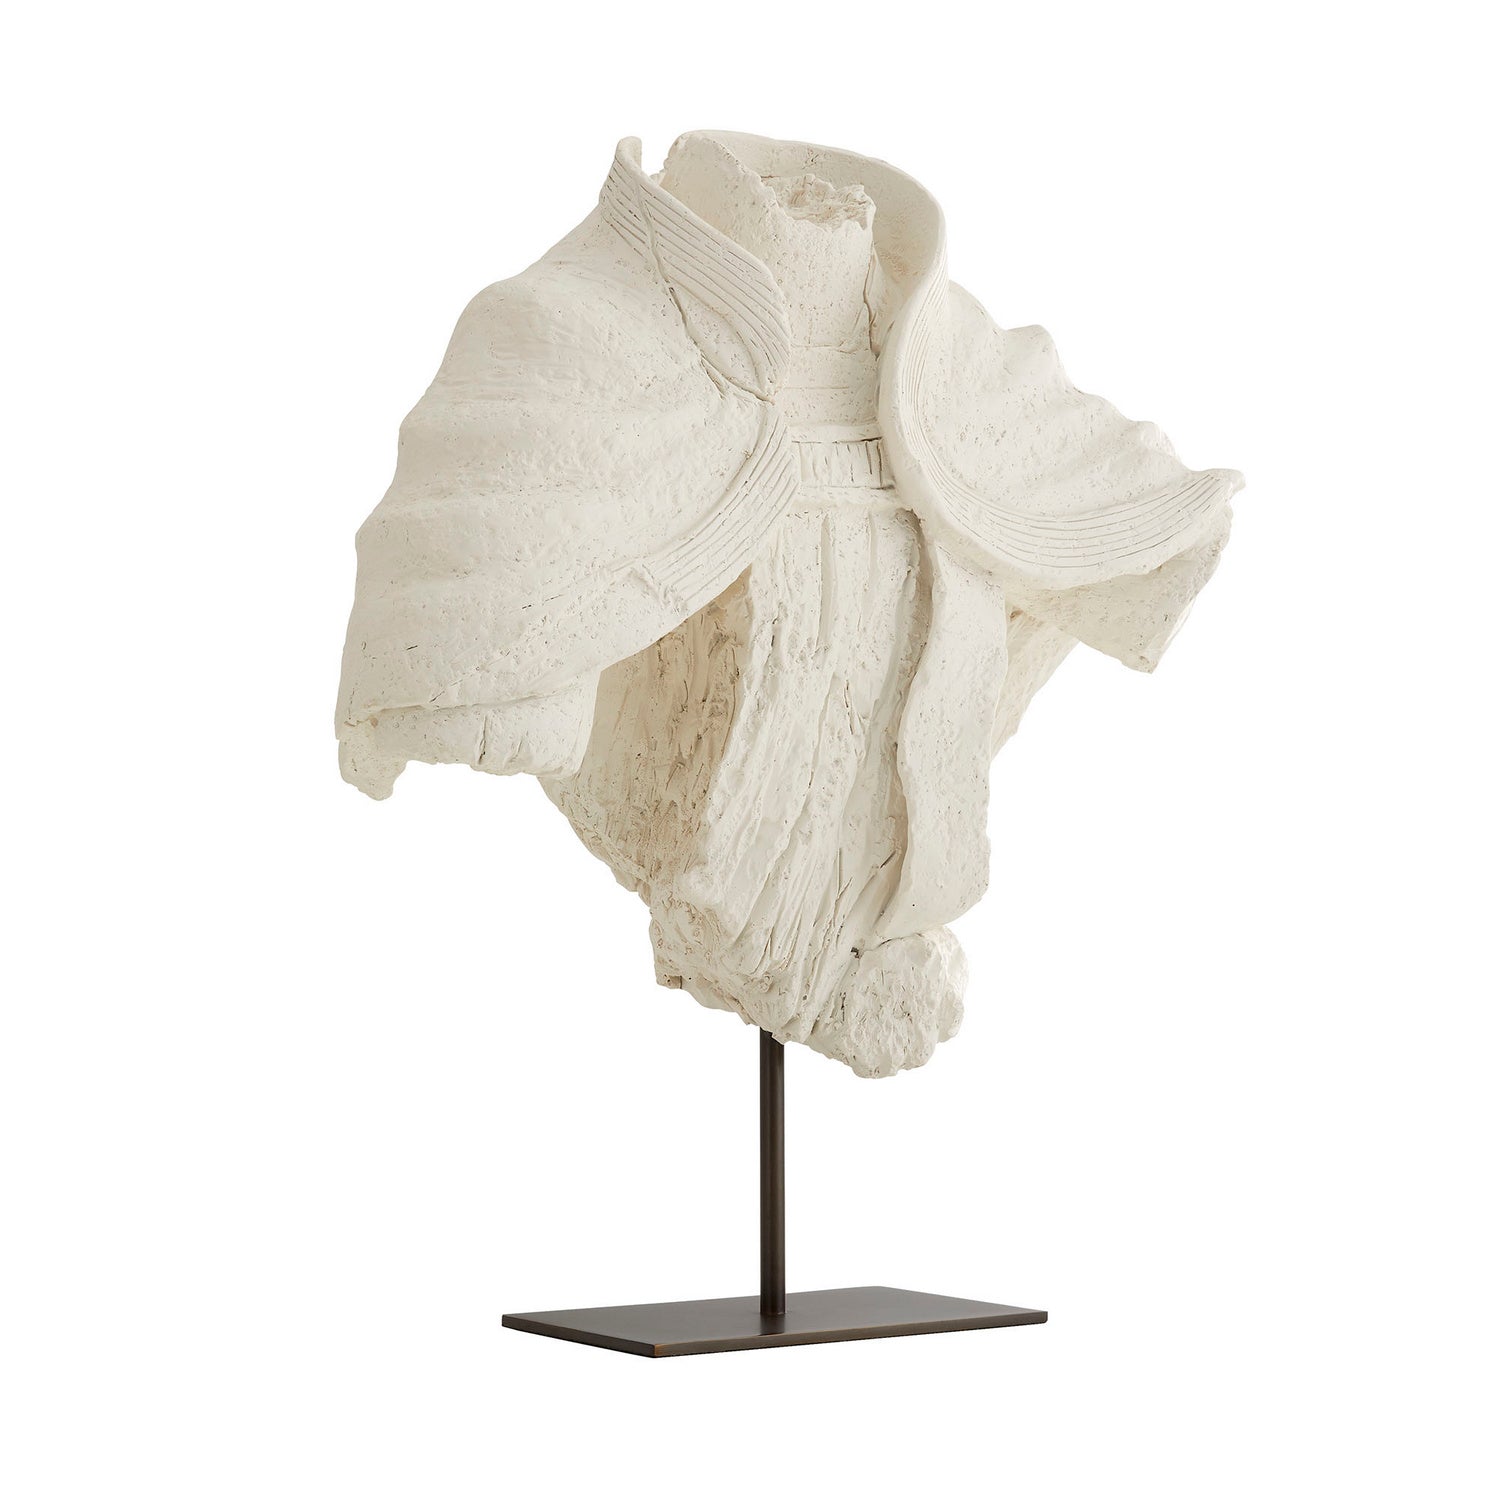 Sculpture from the Livio collection in Matte White Plaster finish